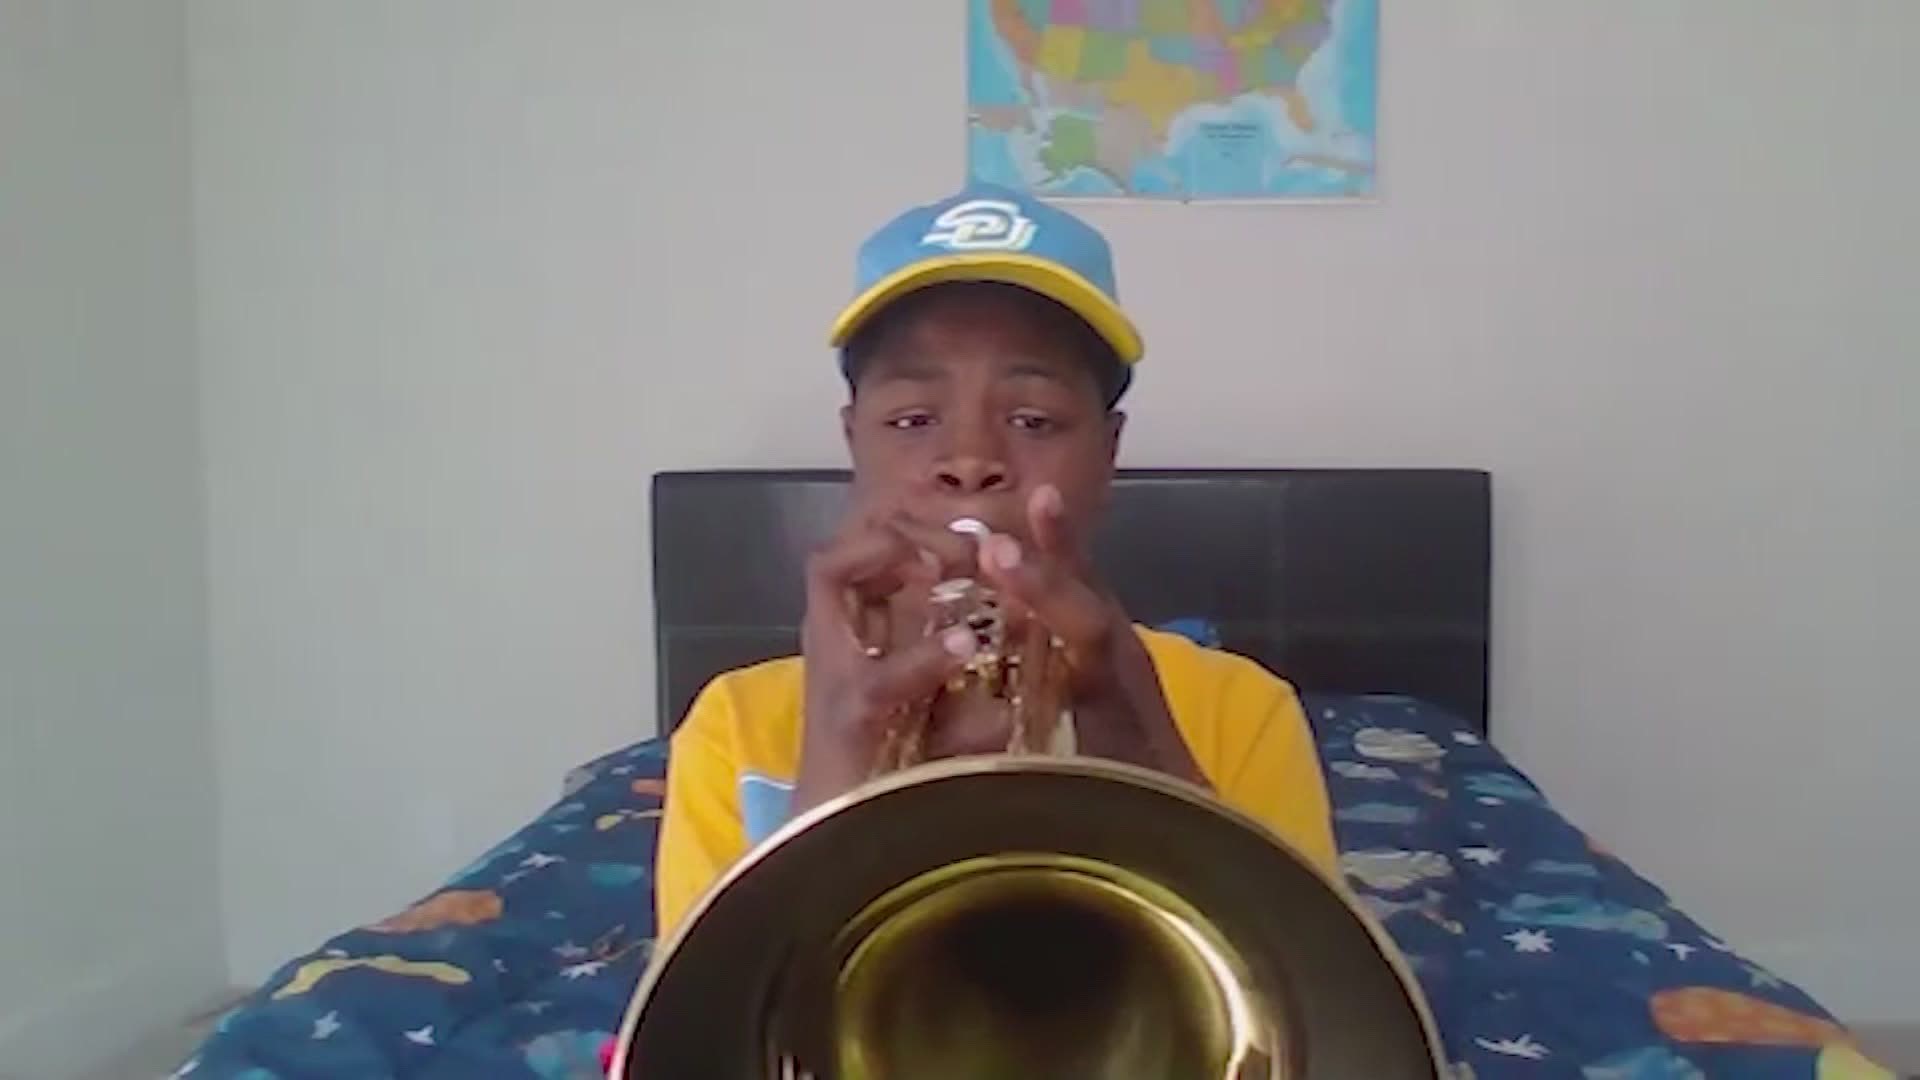 Spring ISD fifth grader Jaron Collins has been named an honorary member of Southern University's Human Jukebox band, his favorite college band!